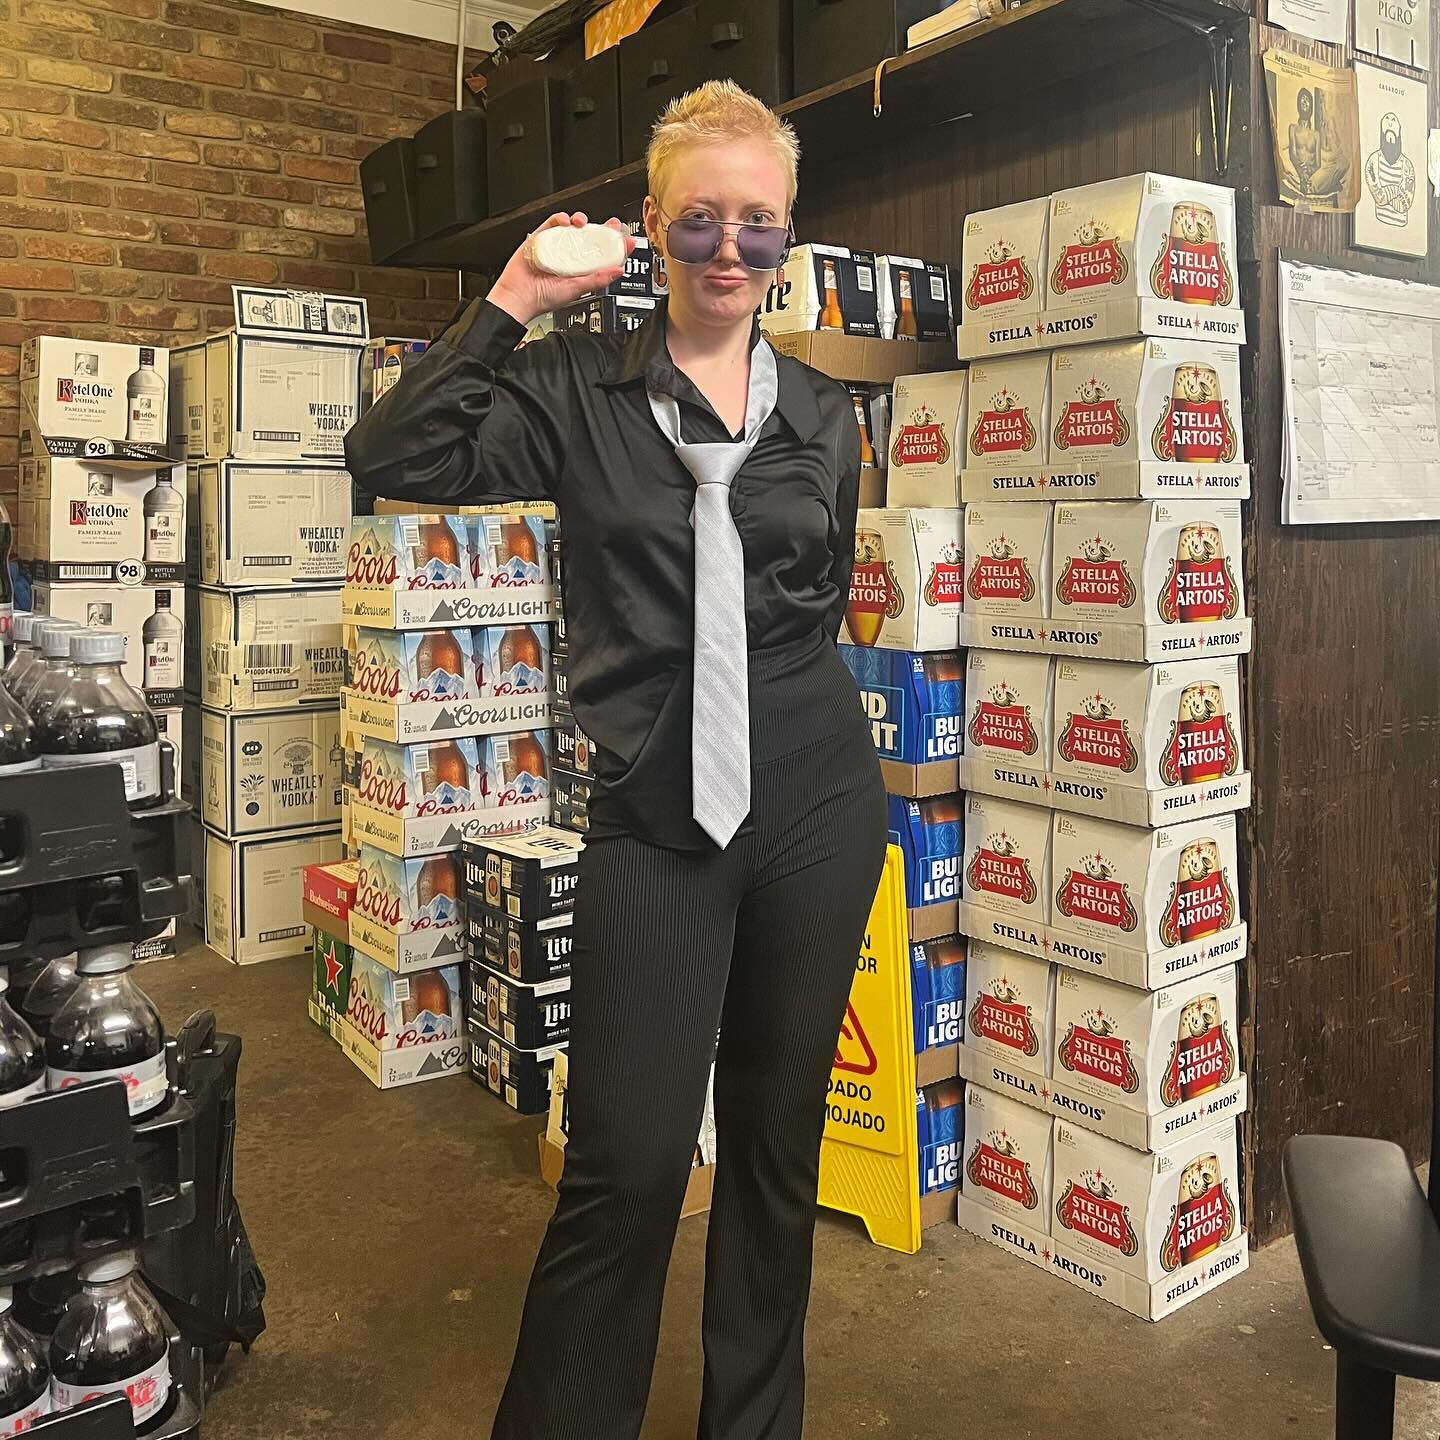 The first rule of Fight Club: you do not talk about Fight Club. 🧼 

Tyler Durden from Fight Club in the house! Let the Halloween shenanigans commence! Giddy up for your spooky spirits + boos. 

&mdash;
#halloween #spirits #booze #giddyup #augustaga